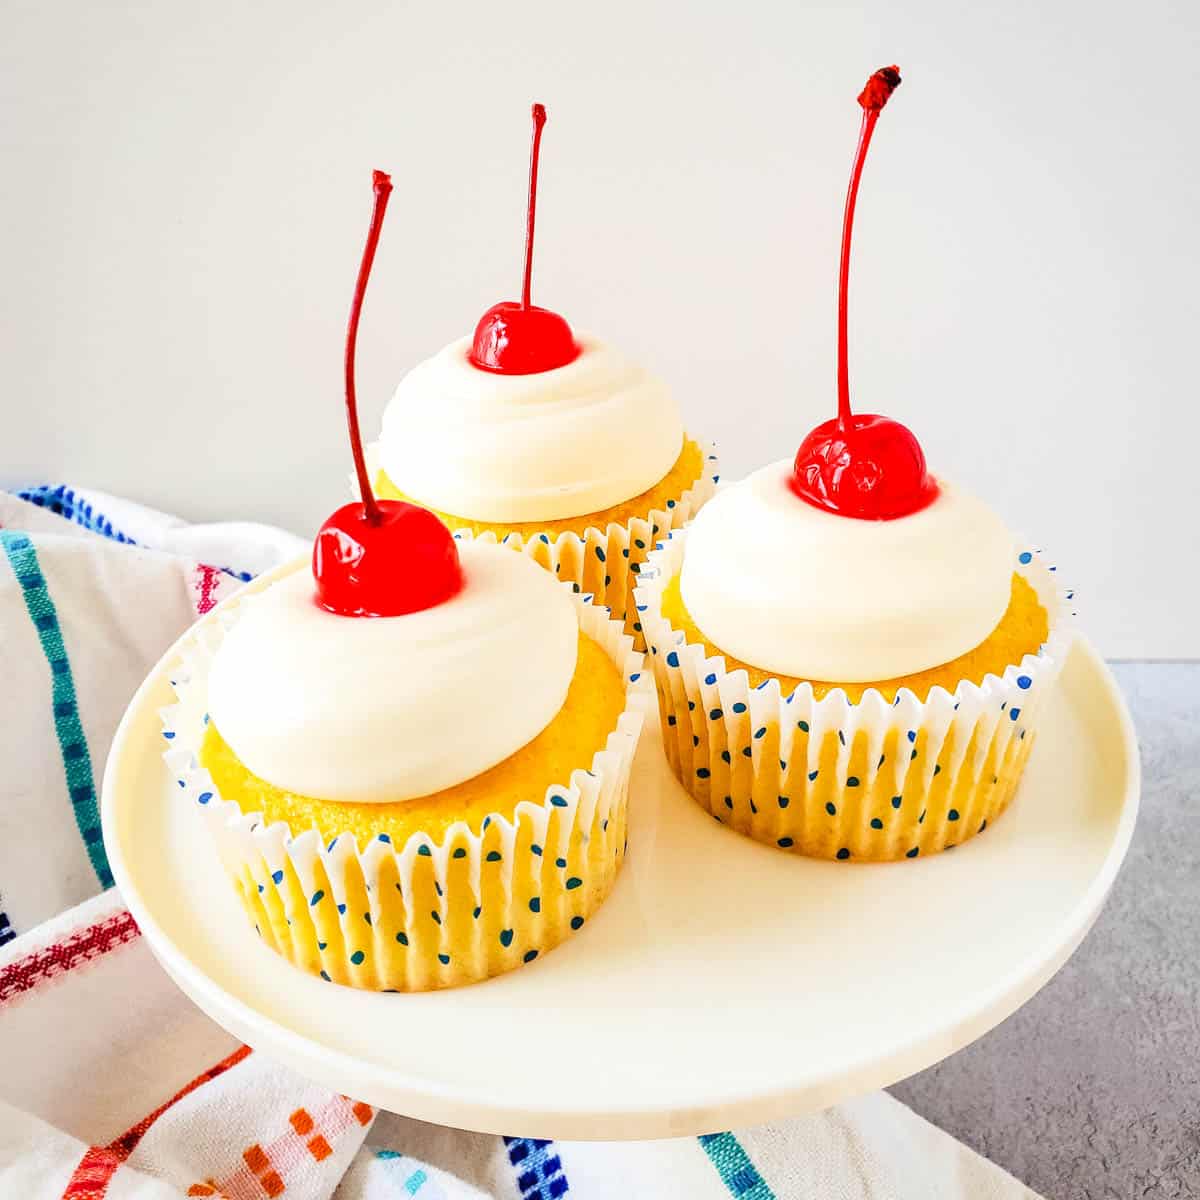 Three coconut cupcakes with frosting and maraschino cherries on a platter.